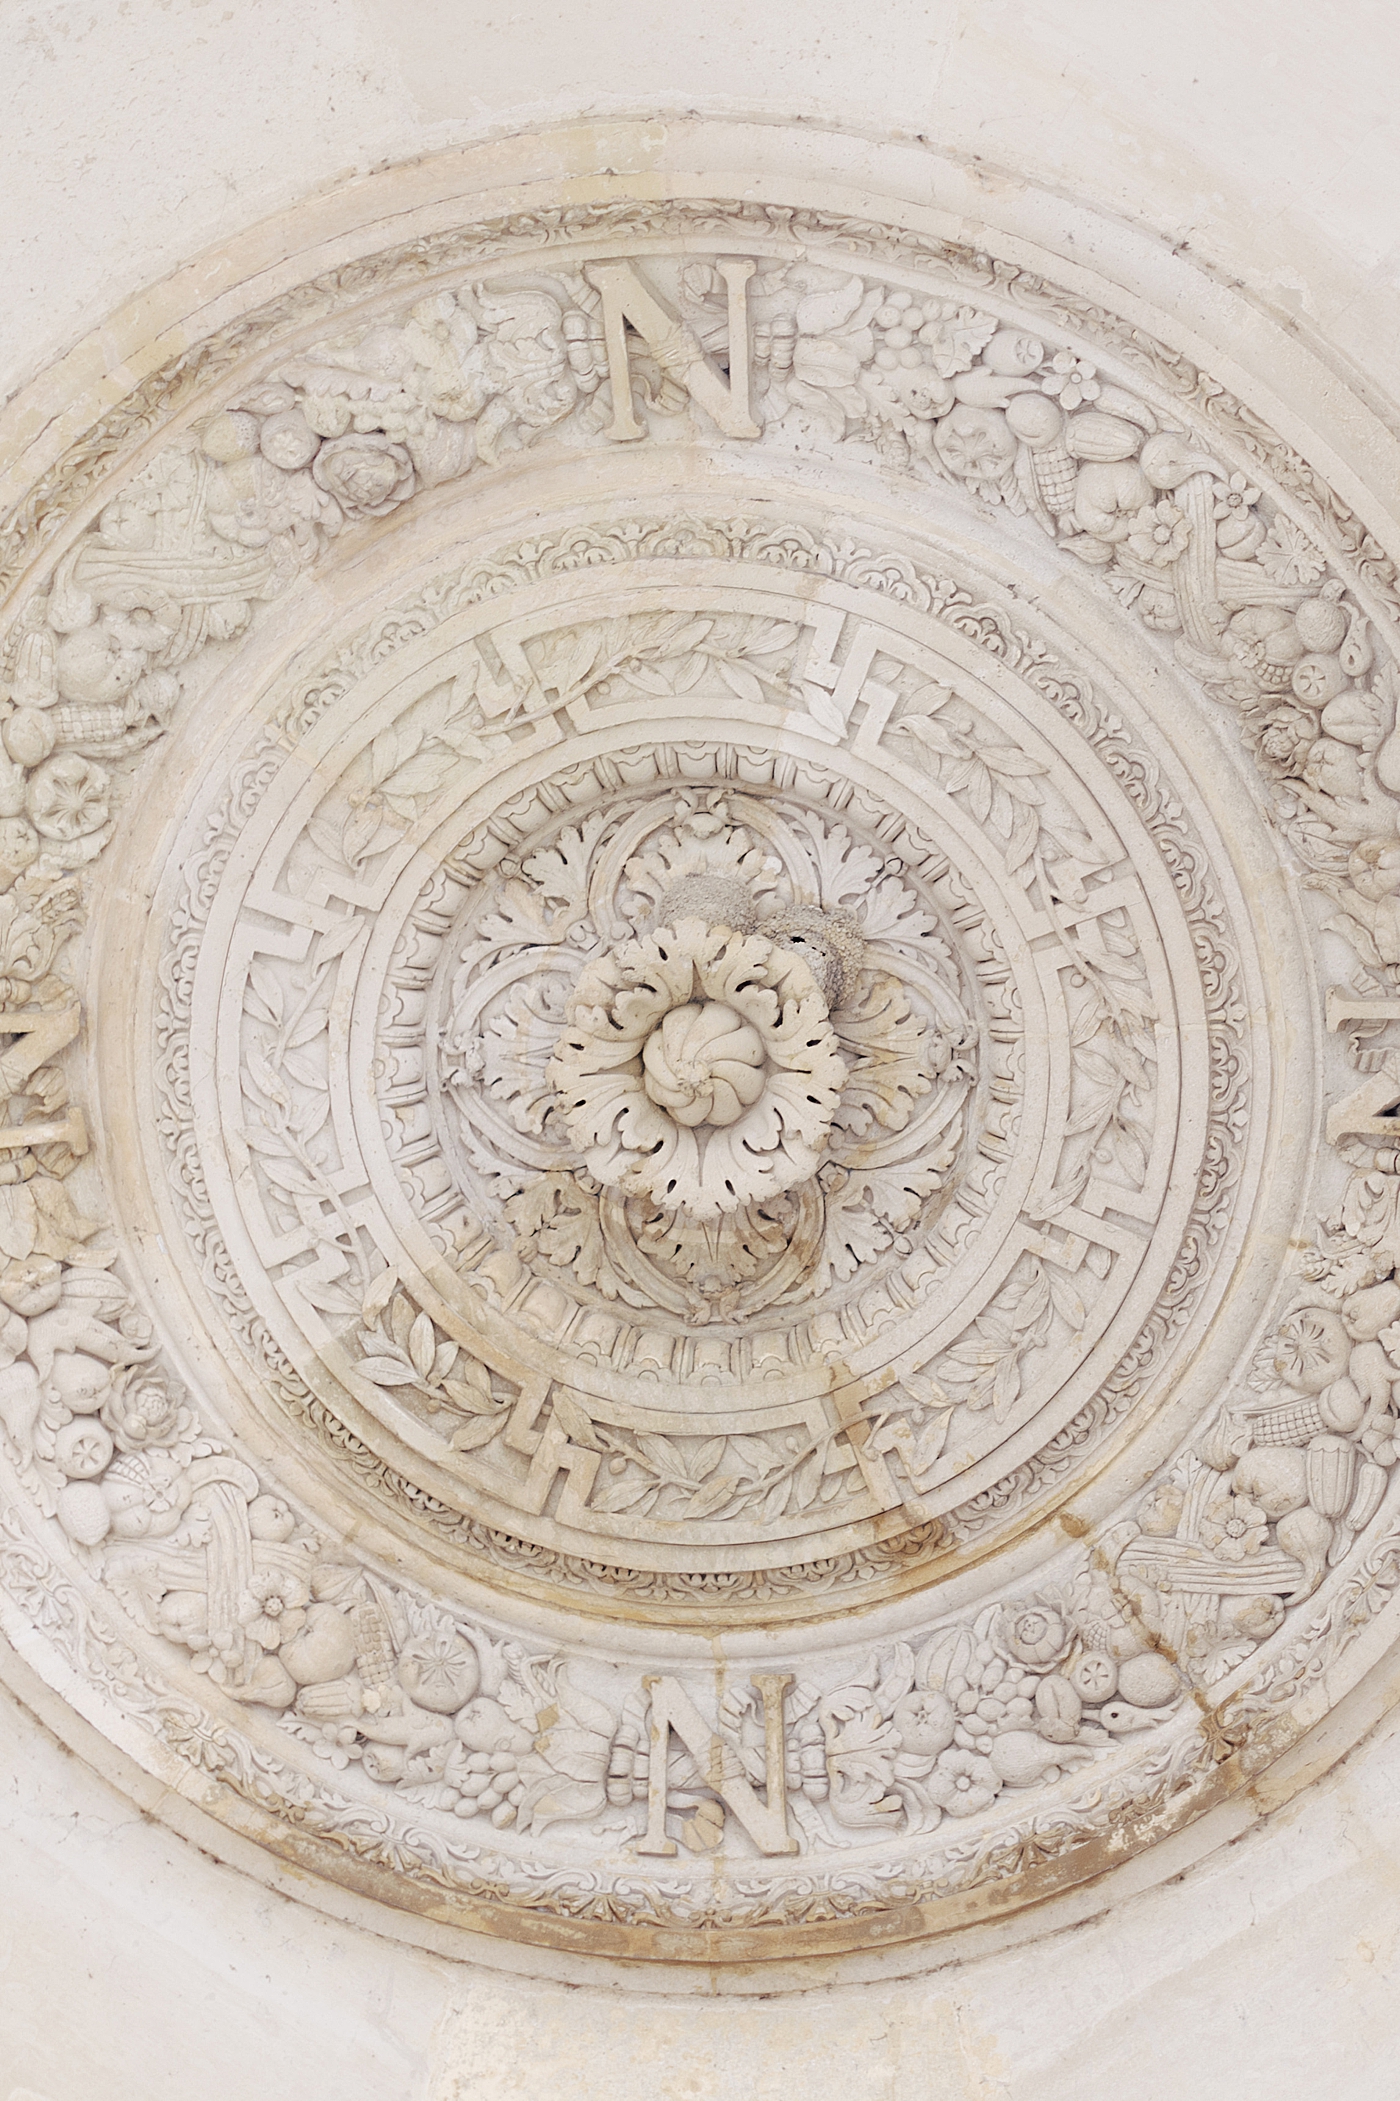 Ornate ceiling details during a Paris Elopement | Image by Hope Helmuth Photography